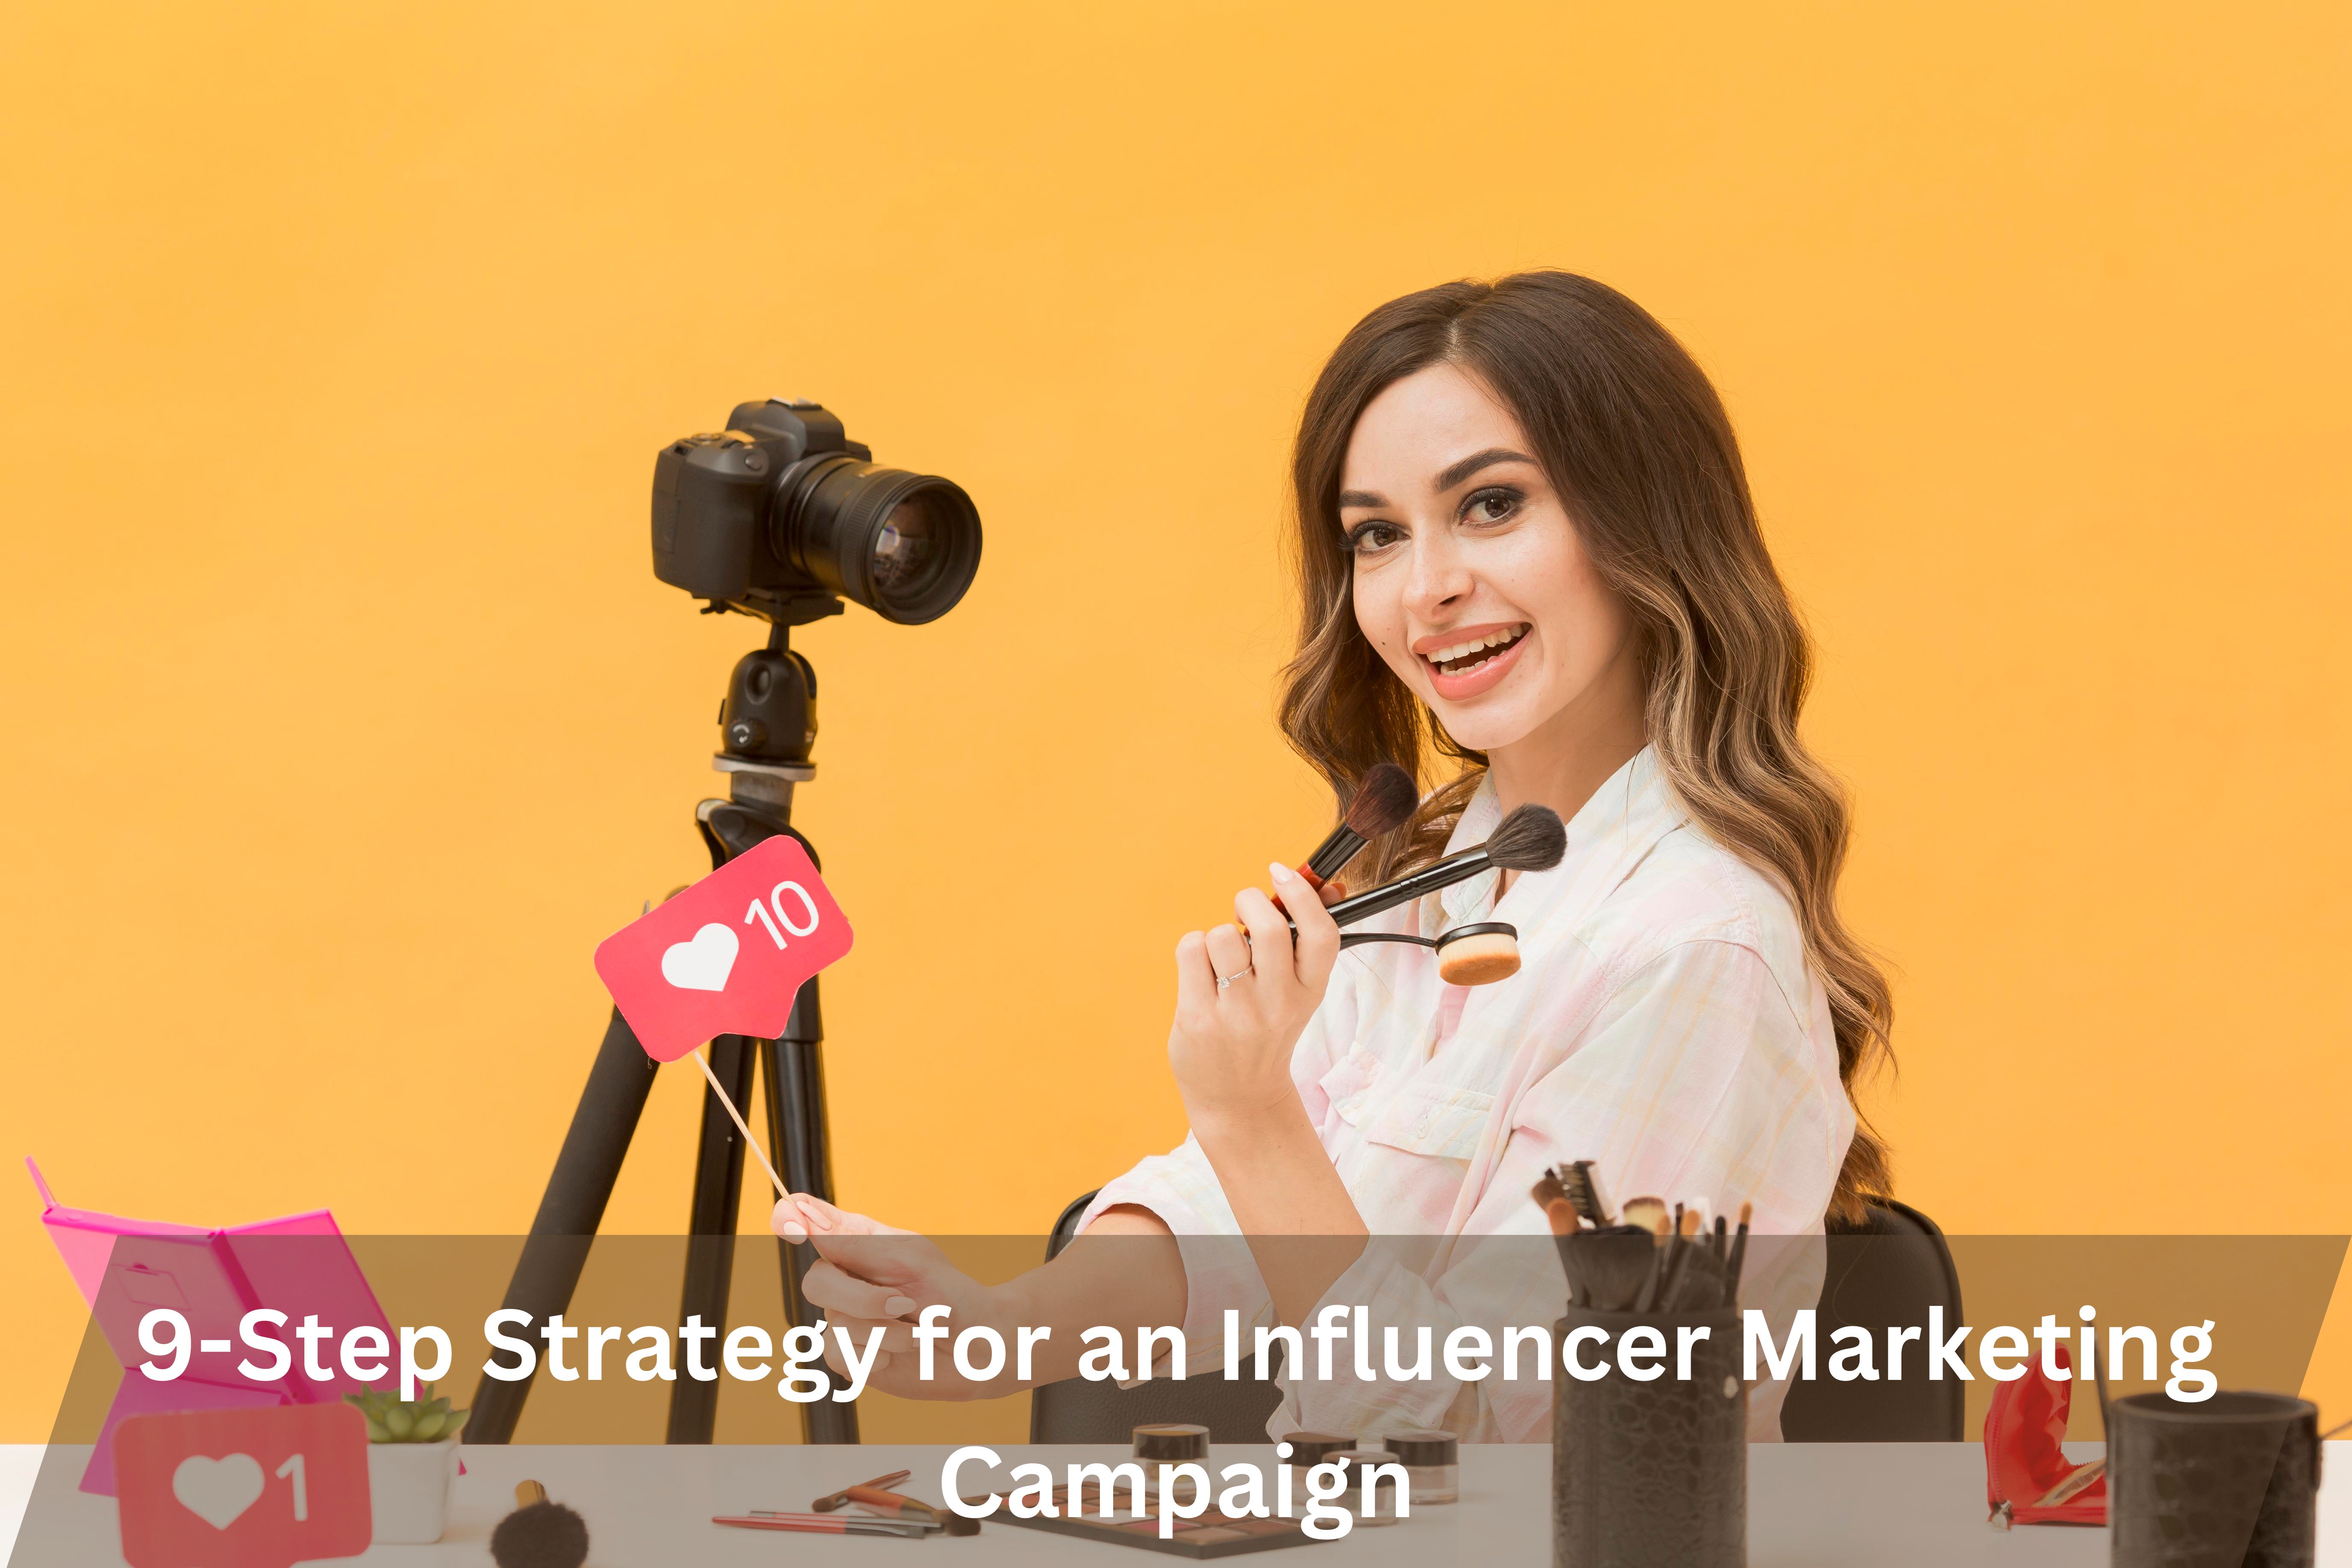 Strategy for an Influencer Marketing Campaign